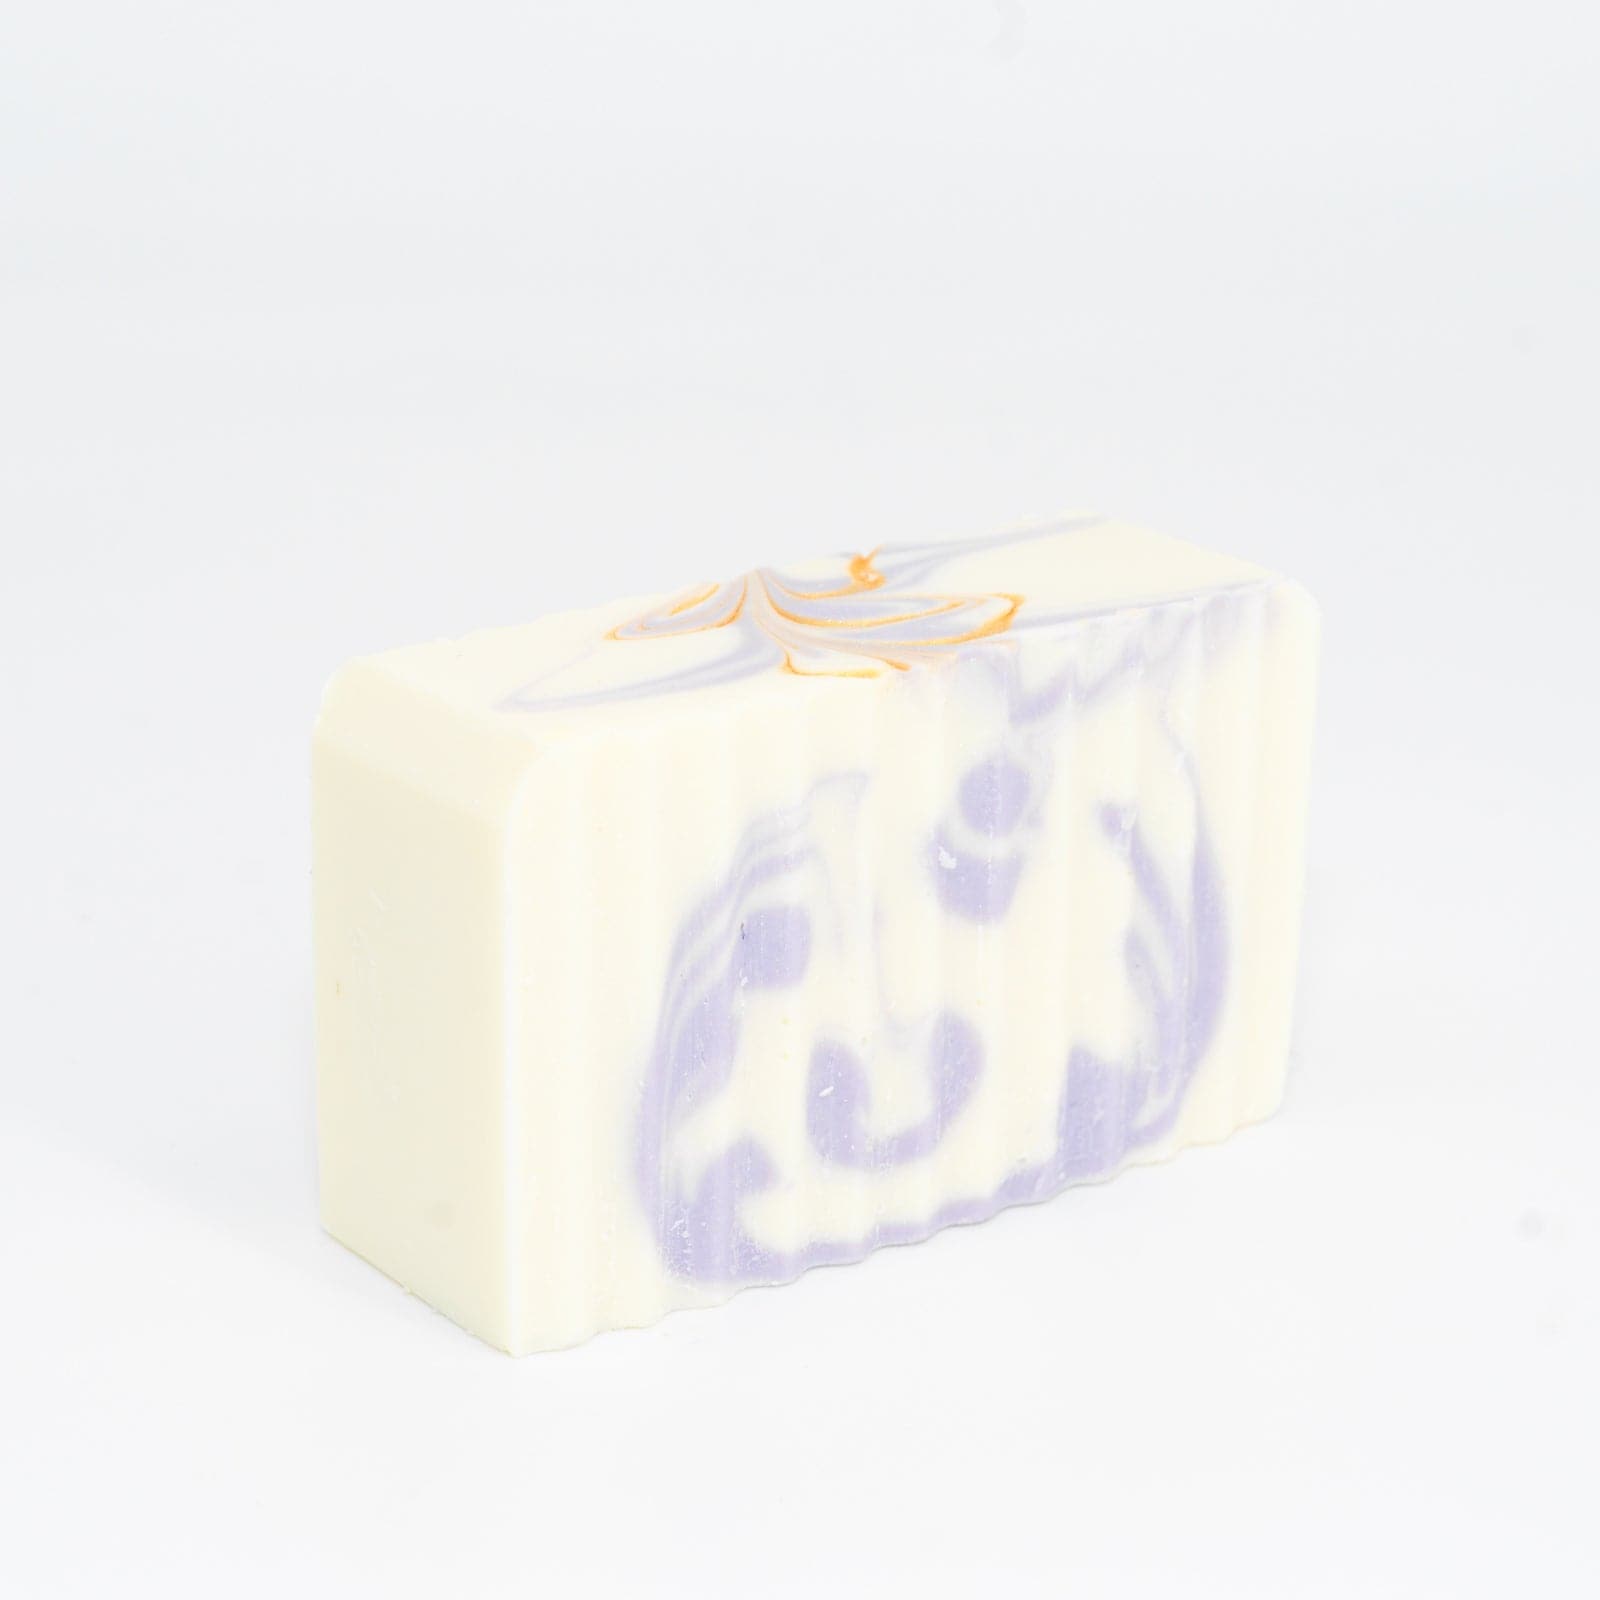 Buff City Soap's lavender scented white shea butter soap with purple and gold highlights